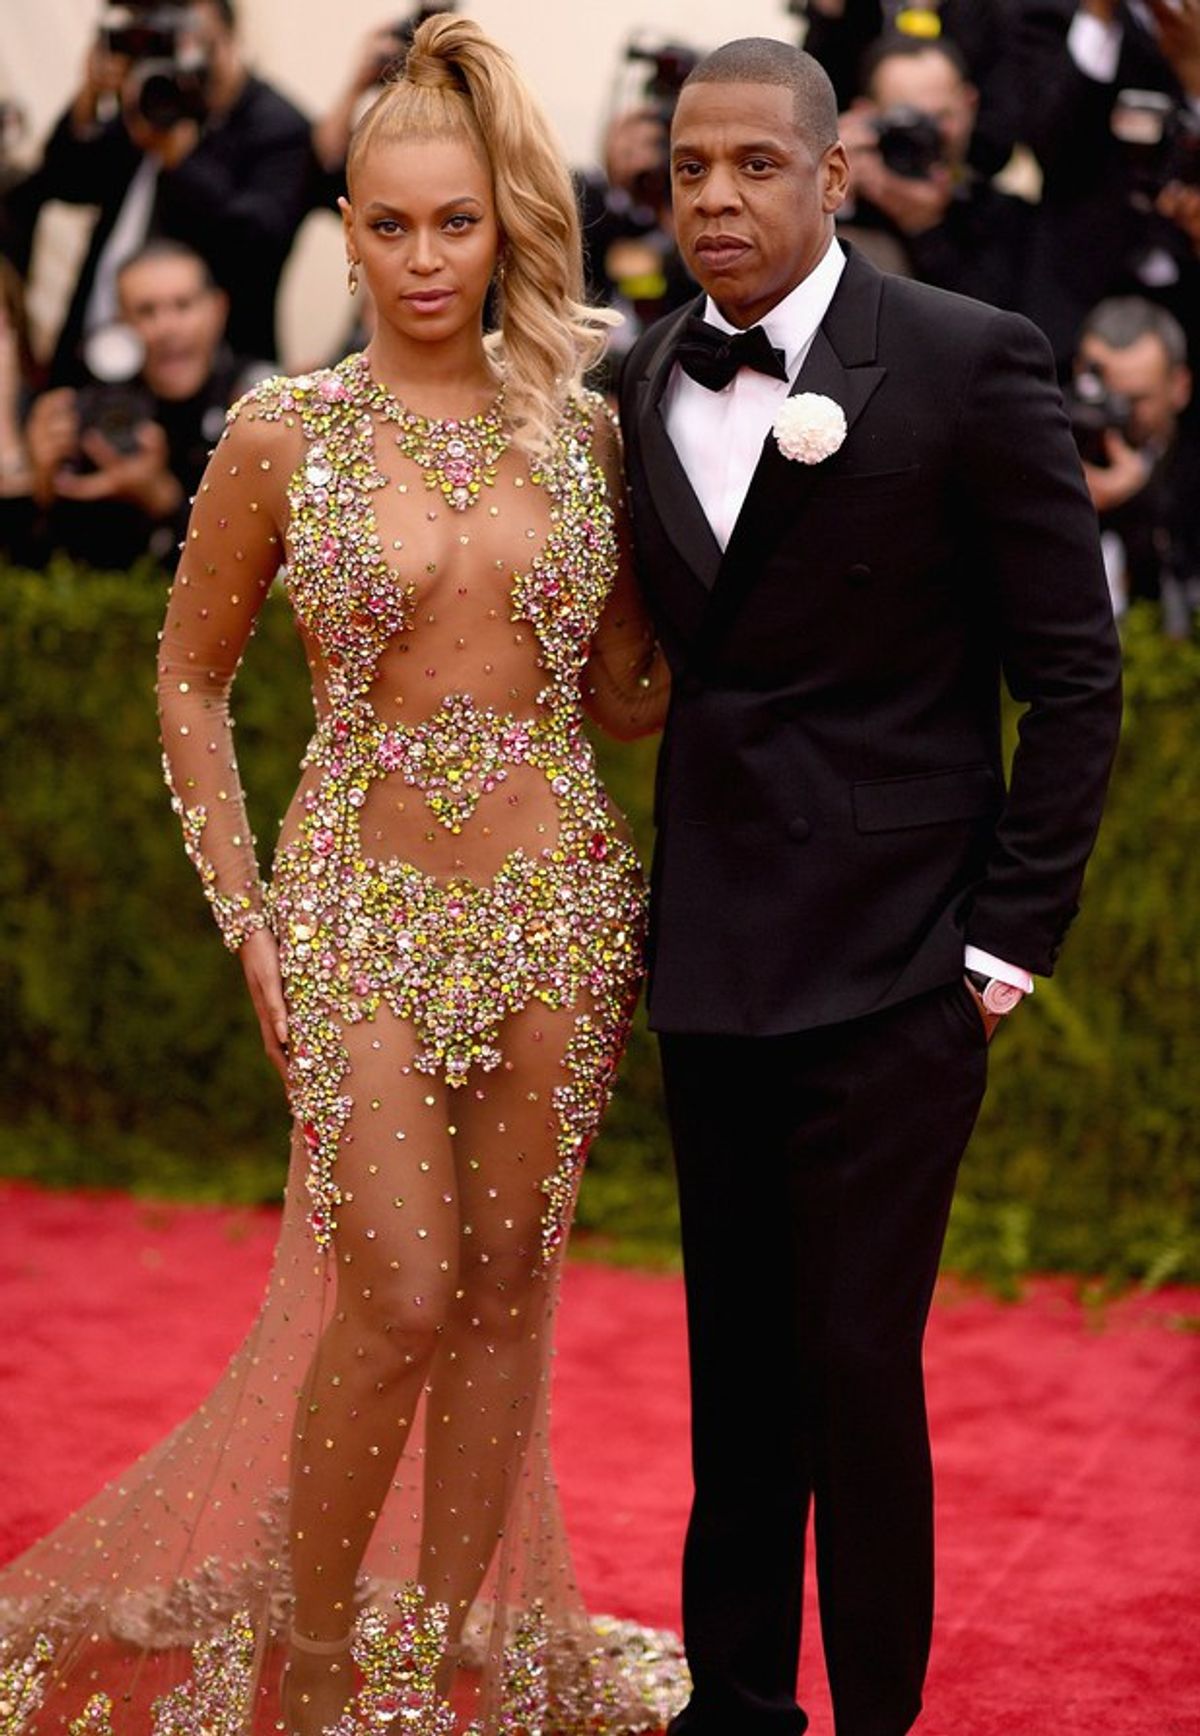 27 Thoughts On The 2015 Met Ball